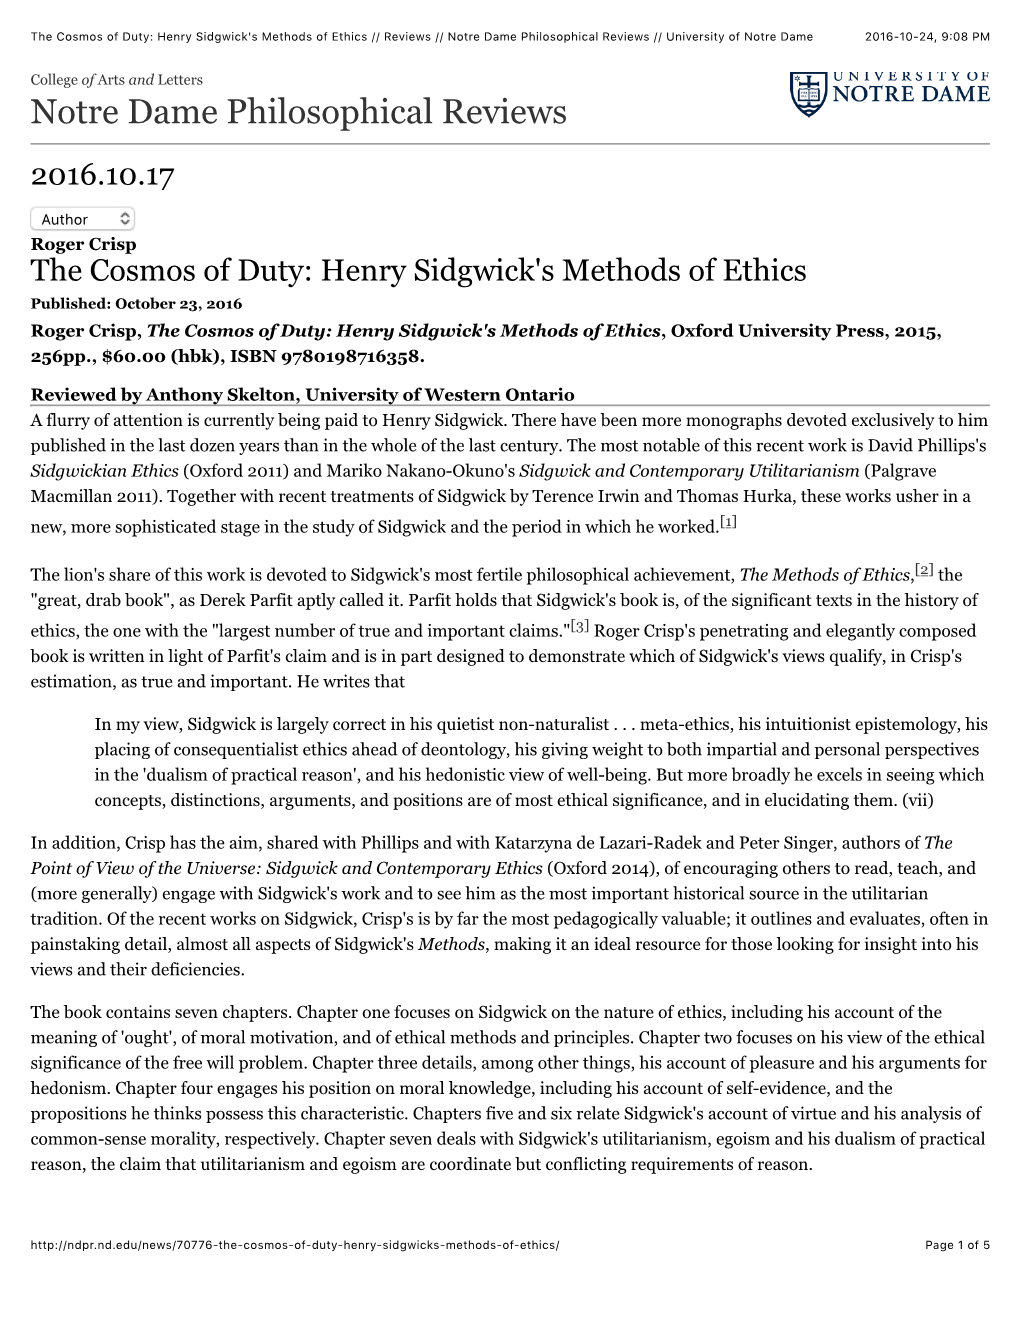 The Cosmos of Duty: Henry Sidgwick's Methods of Ethics // Reviews // Notre Dame Philosophical Reviews // University of Notre Dame 2016-10-24, 9:08 PM